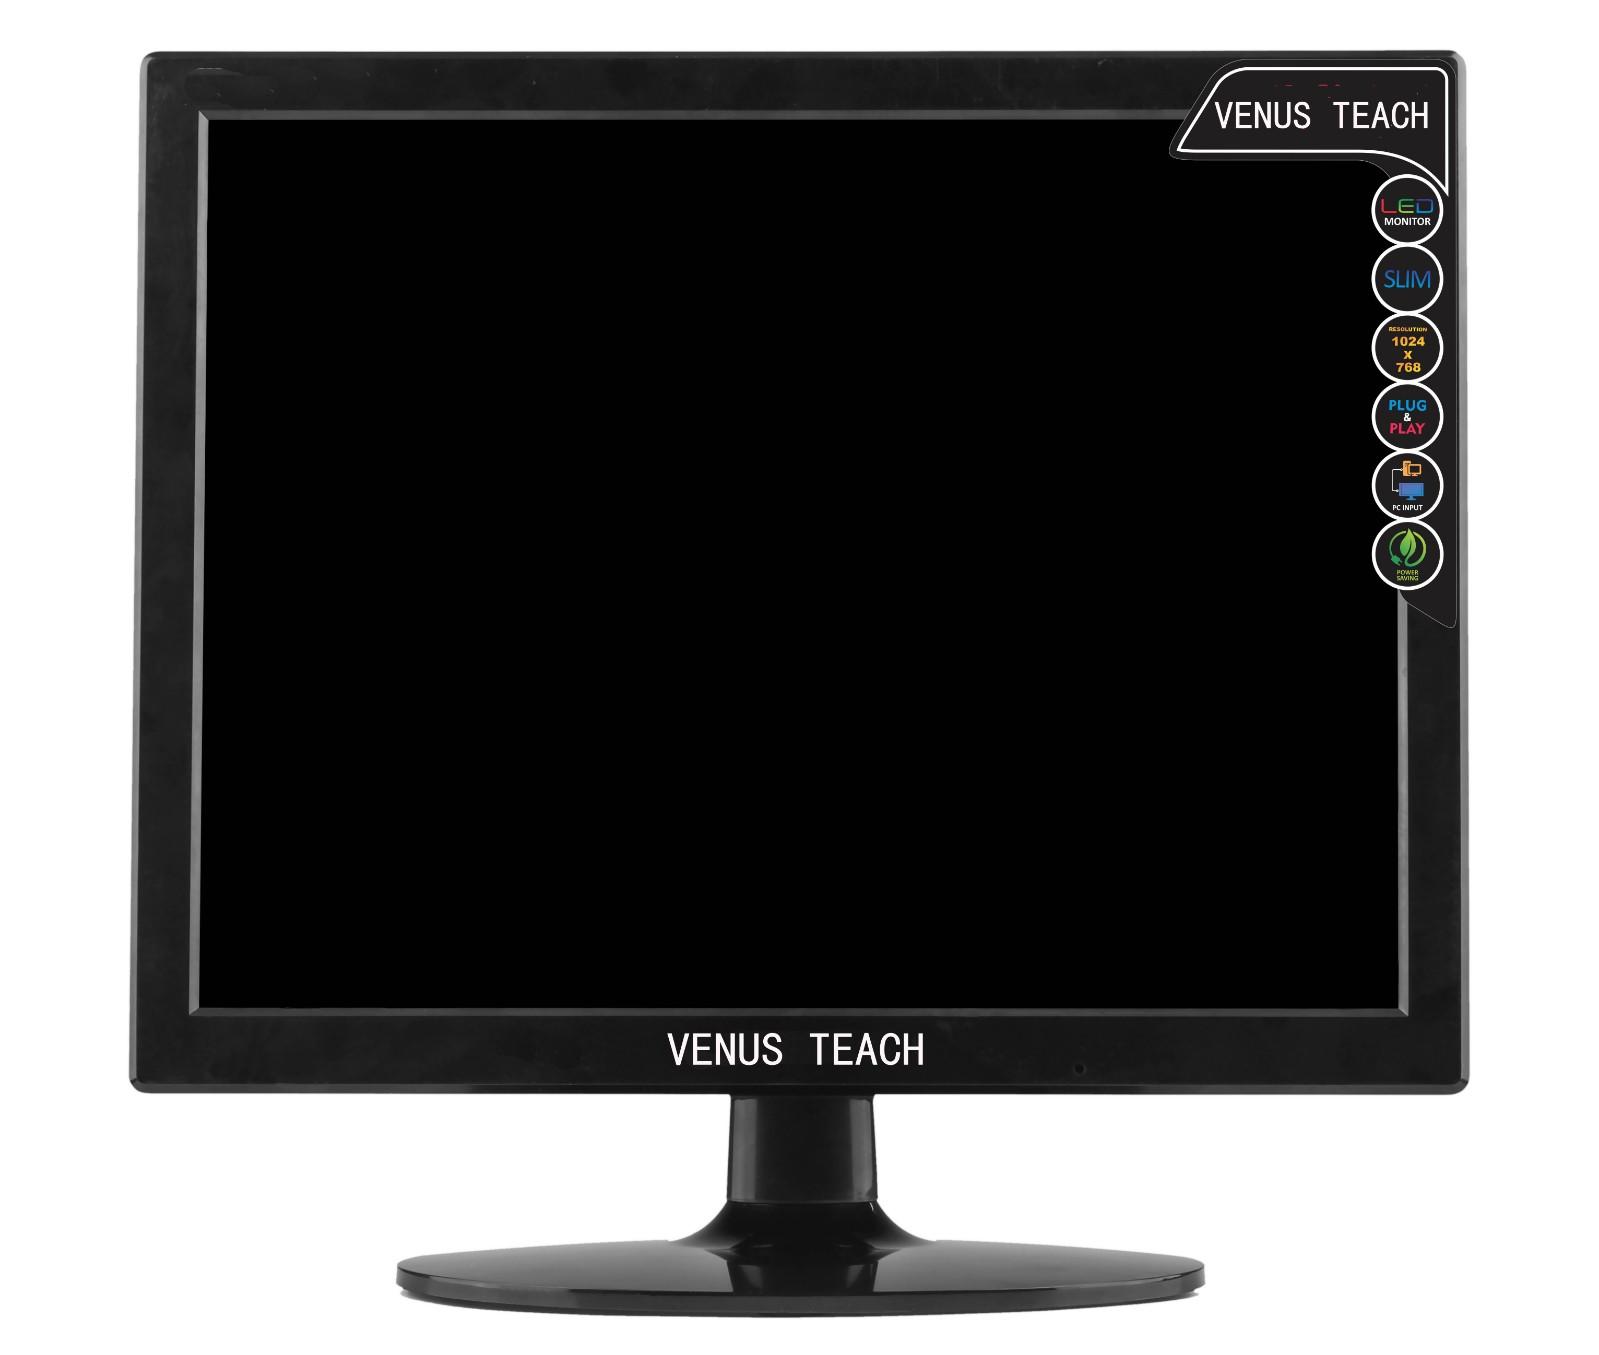 Xinyao LCD monitor 15 lcd with oem service for tv screen